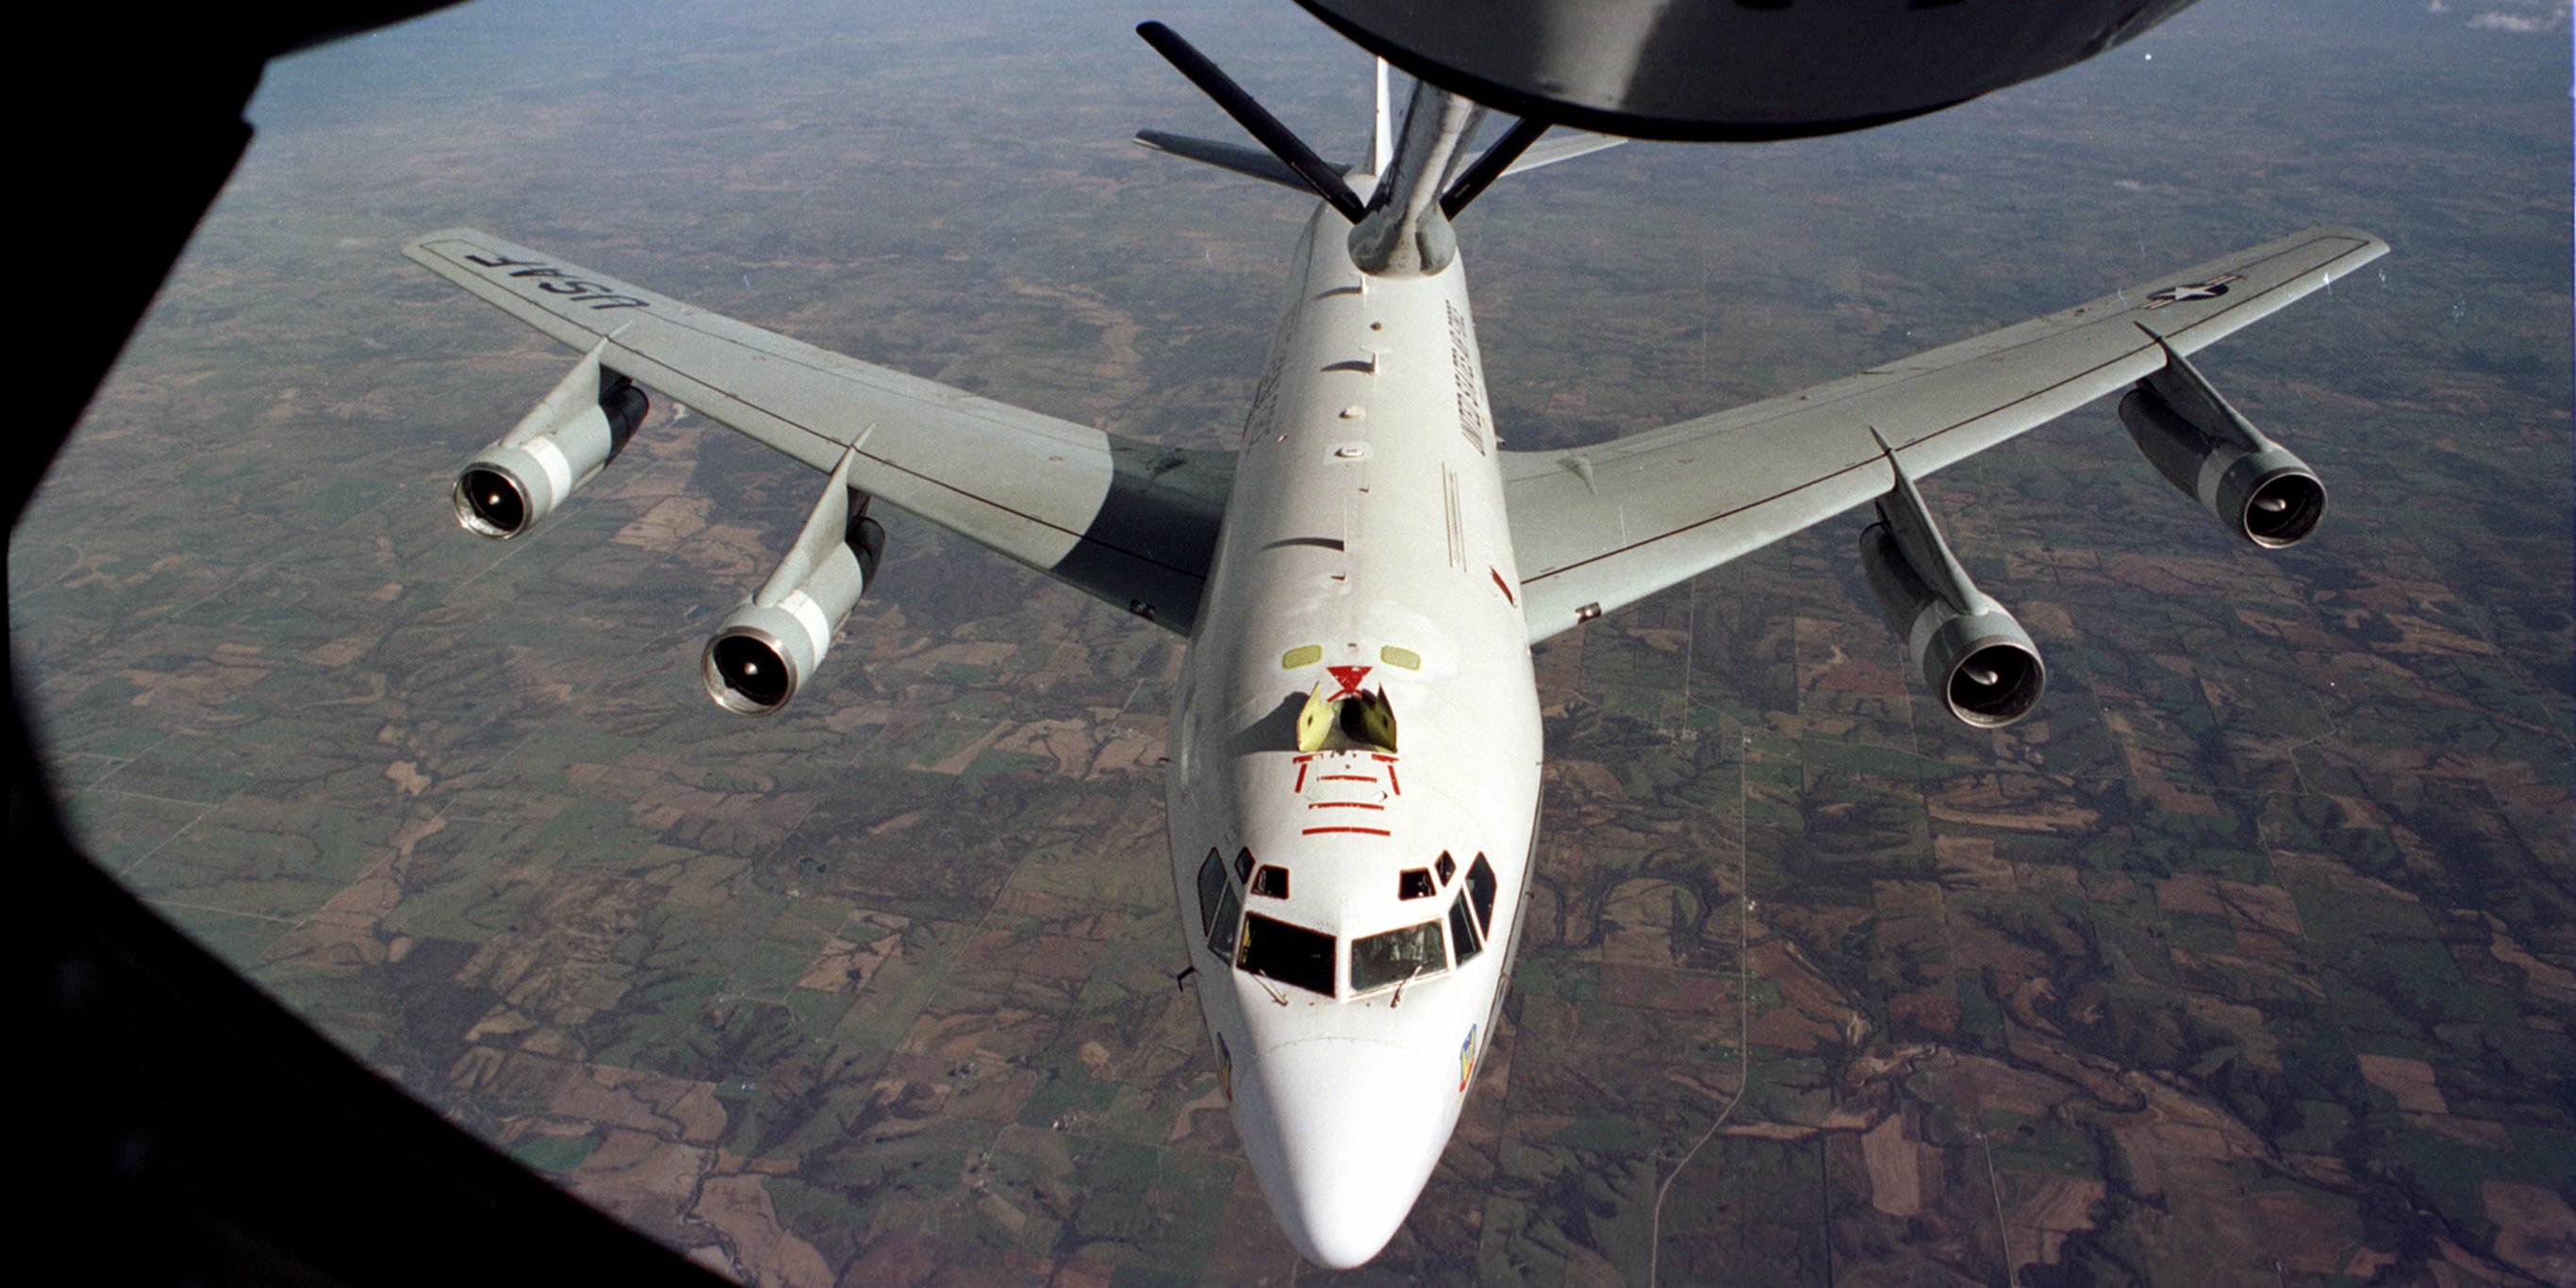 Chinese jets reportedly fly upside down, right above a US plane ...